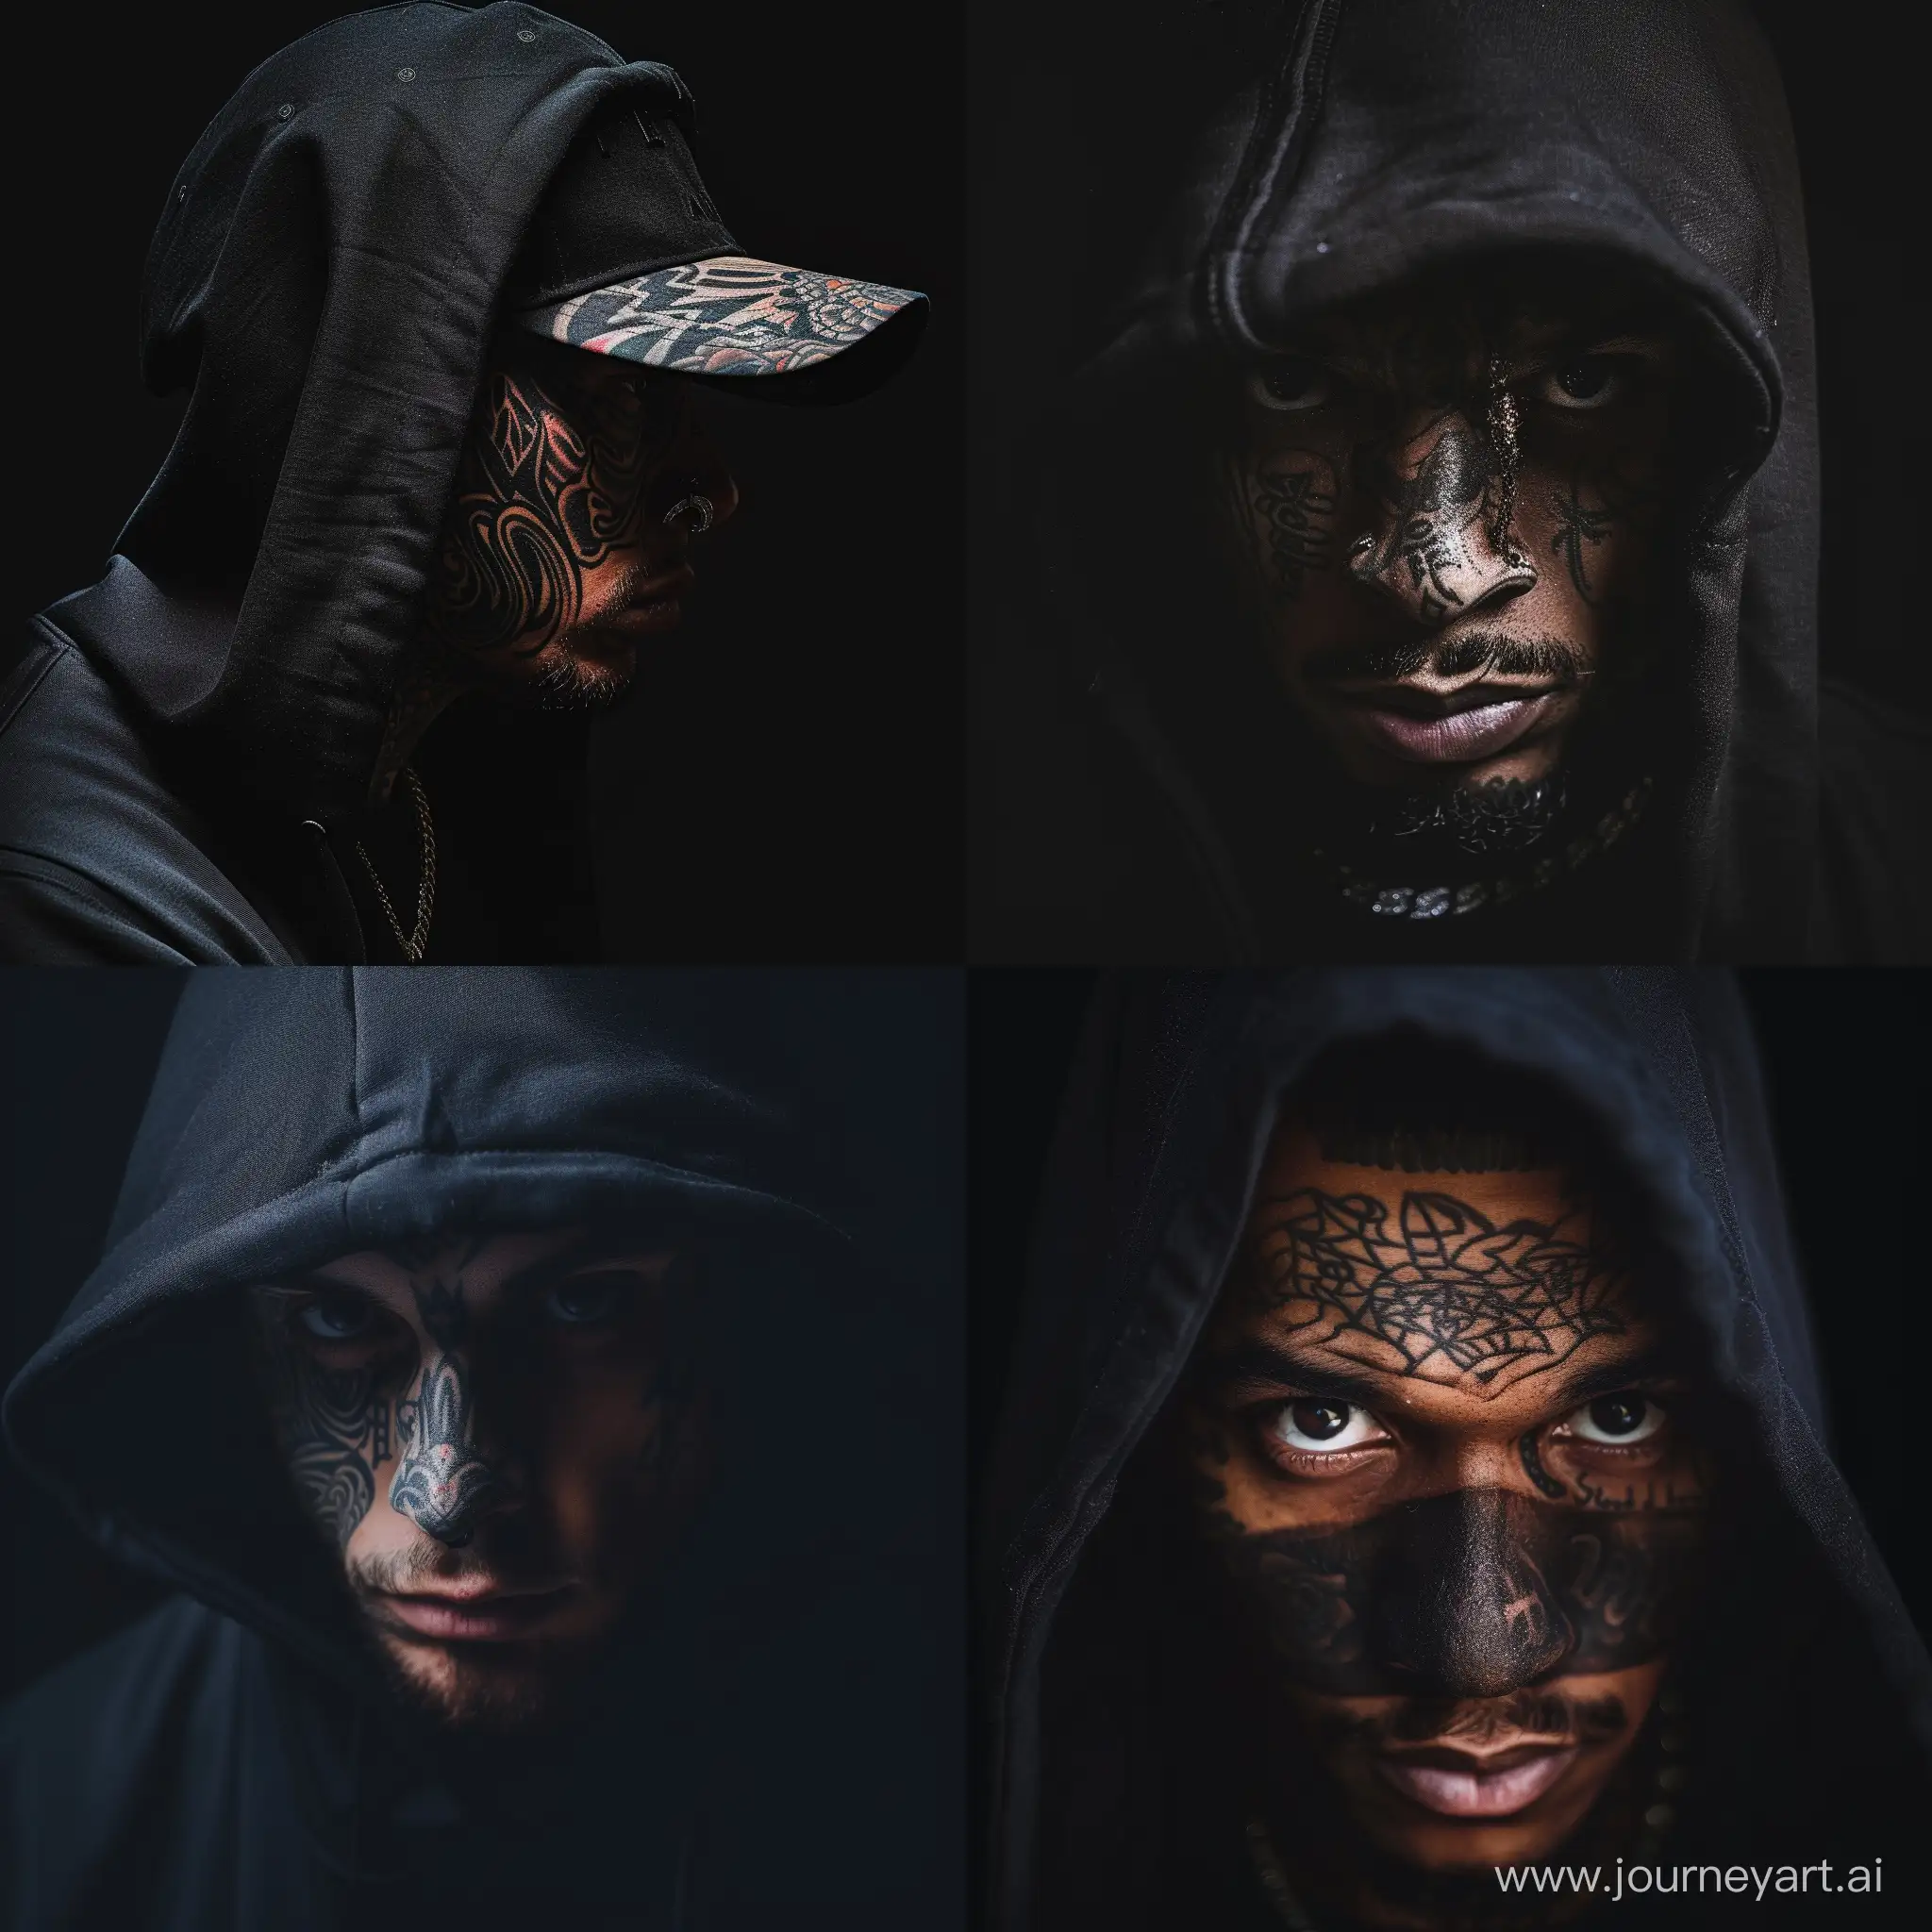 Mysterious-Rapper-with-Face-Tattoos-in-Dark-Ambiance